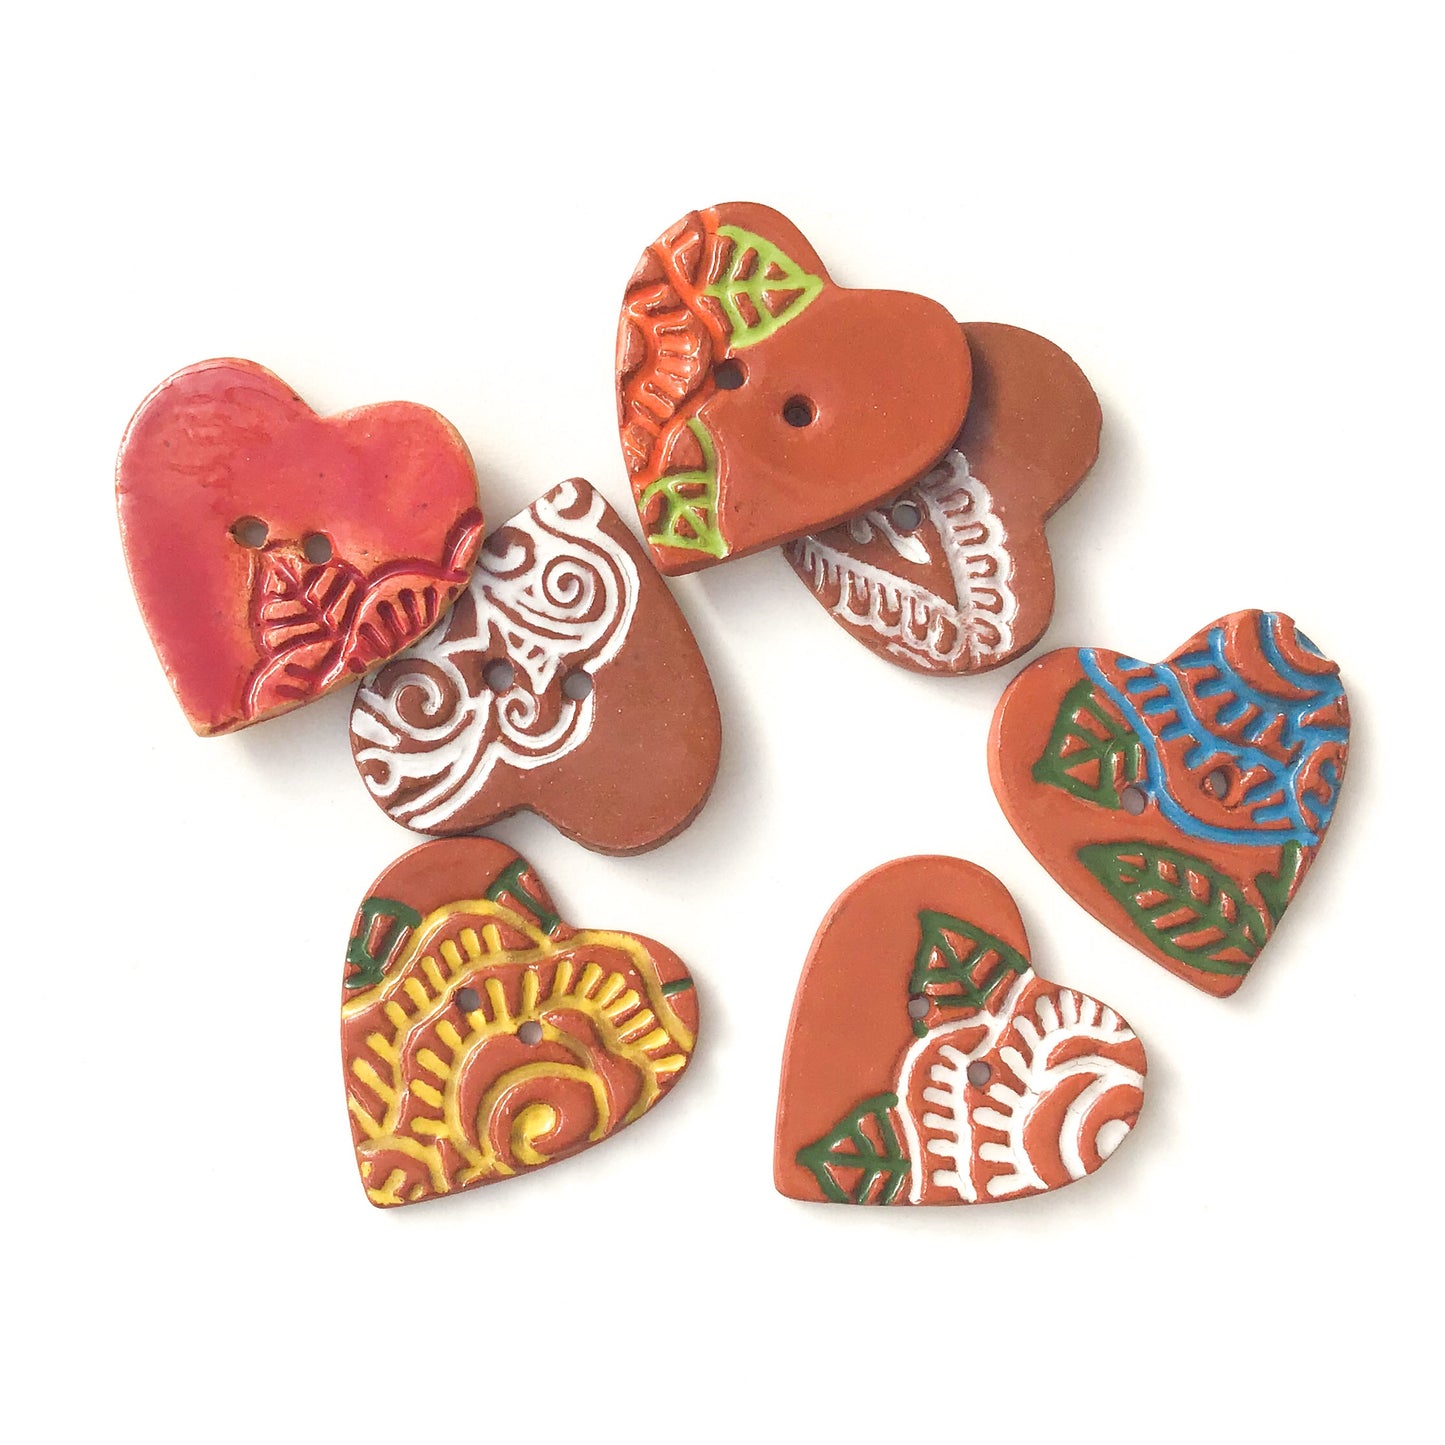 Large Stamped Heart Buttons - Painted Flowers Ceramic Heart Button - 1 3/8"